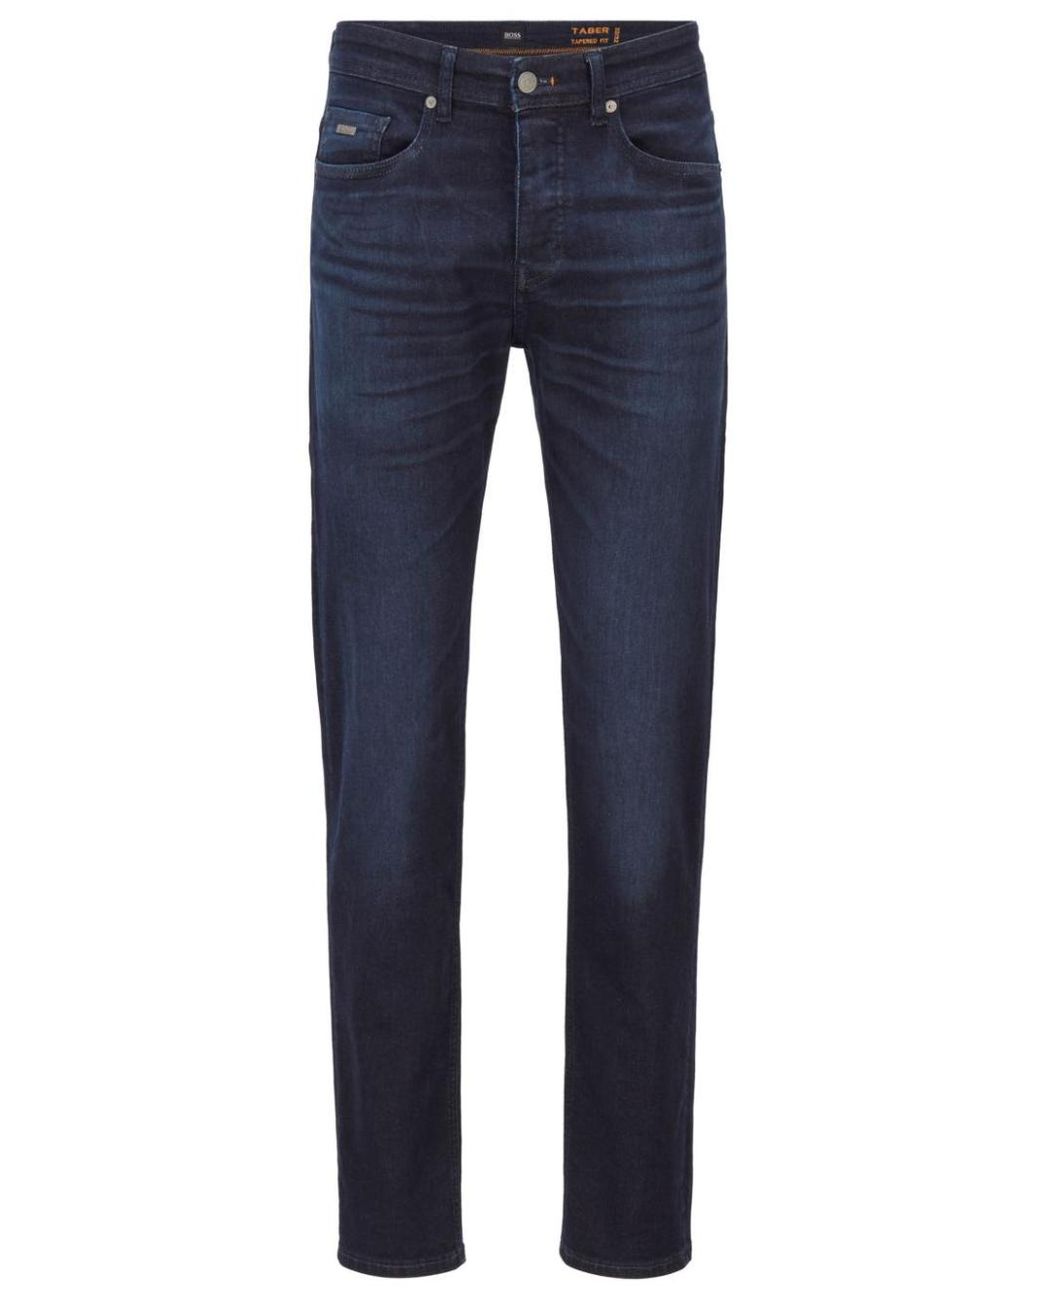 BOSS by HUGO BOSS Boss Tapered Fit Jeans Navy in Blue for Men | Lyst